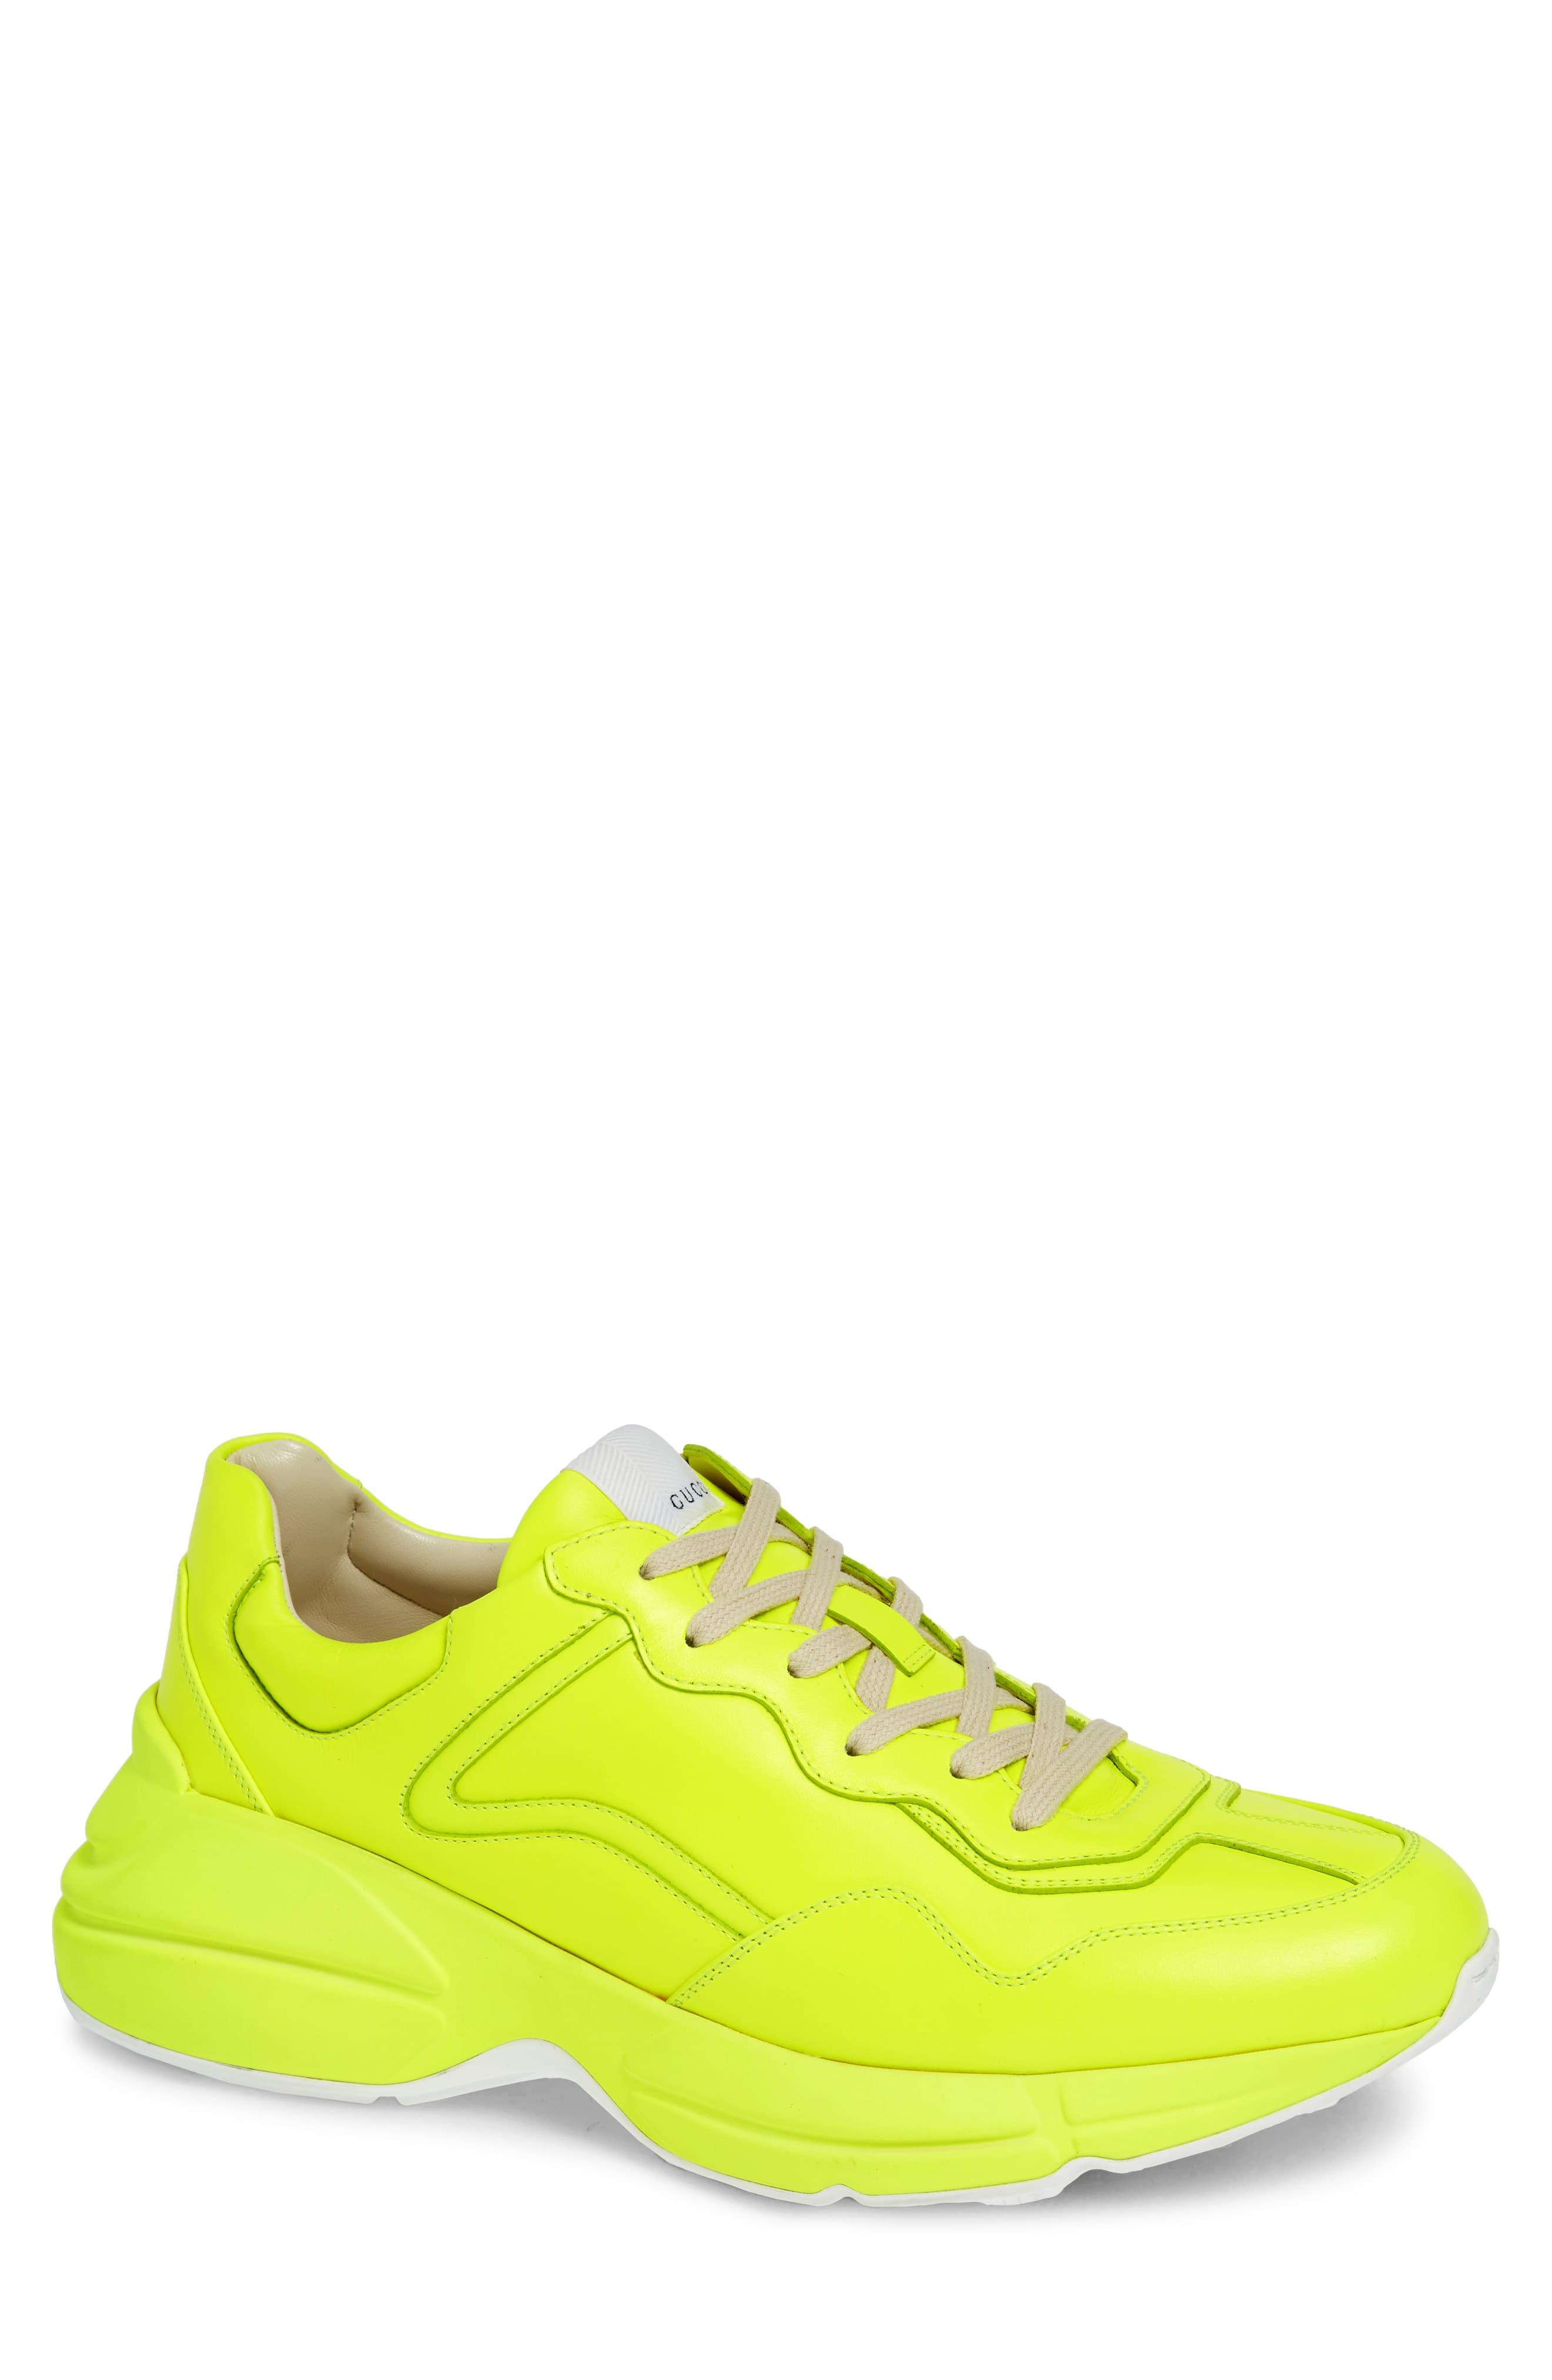 Gucci Rhyton Fluorescent Leather Sneaker in Yellow for Men | Lyst